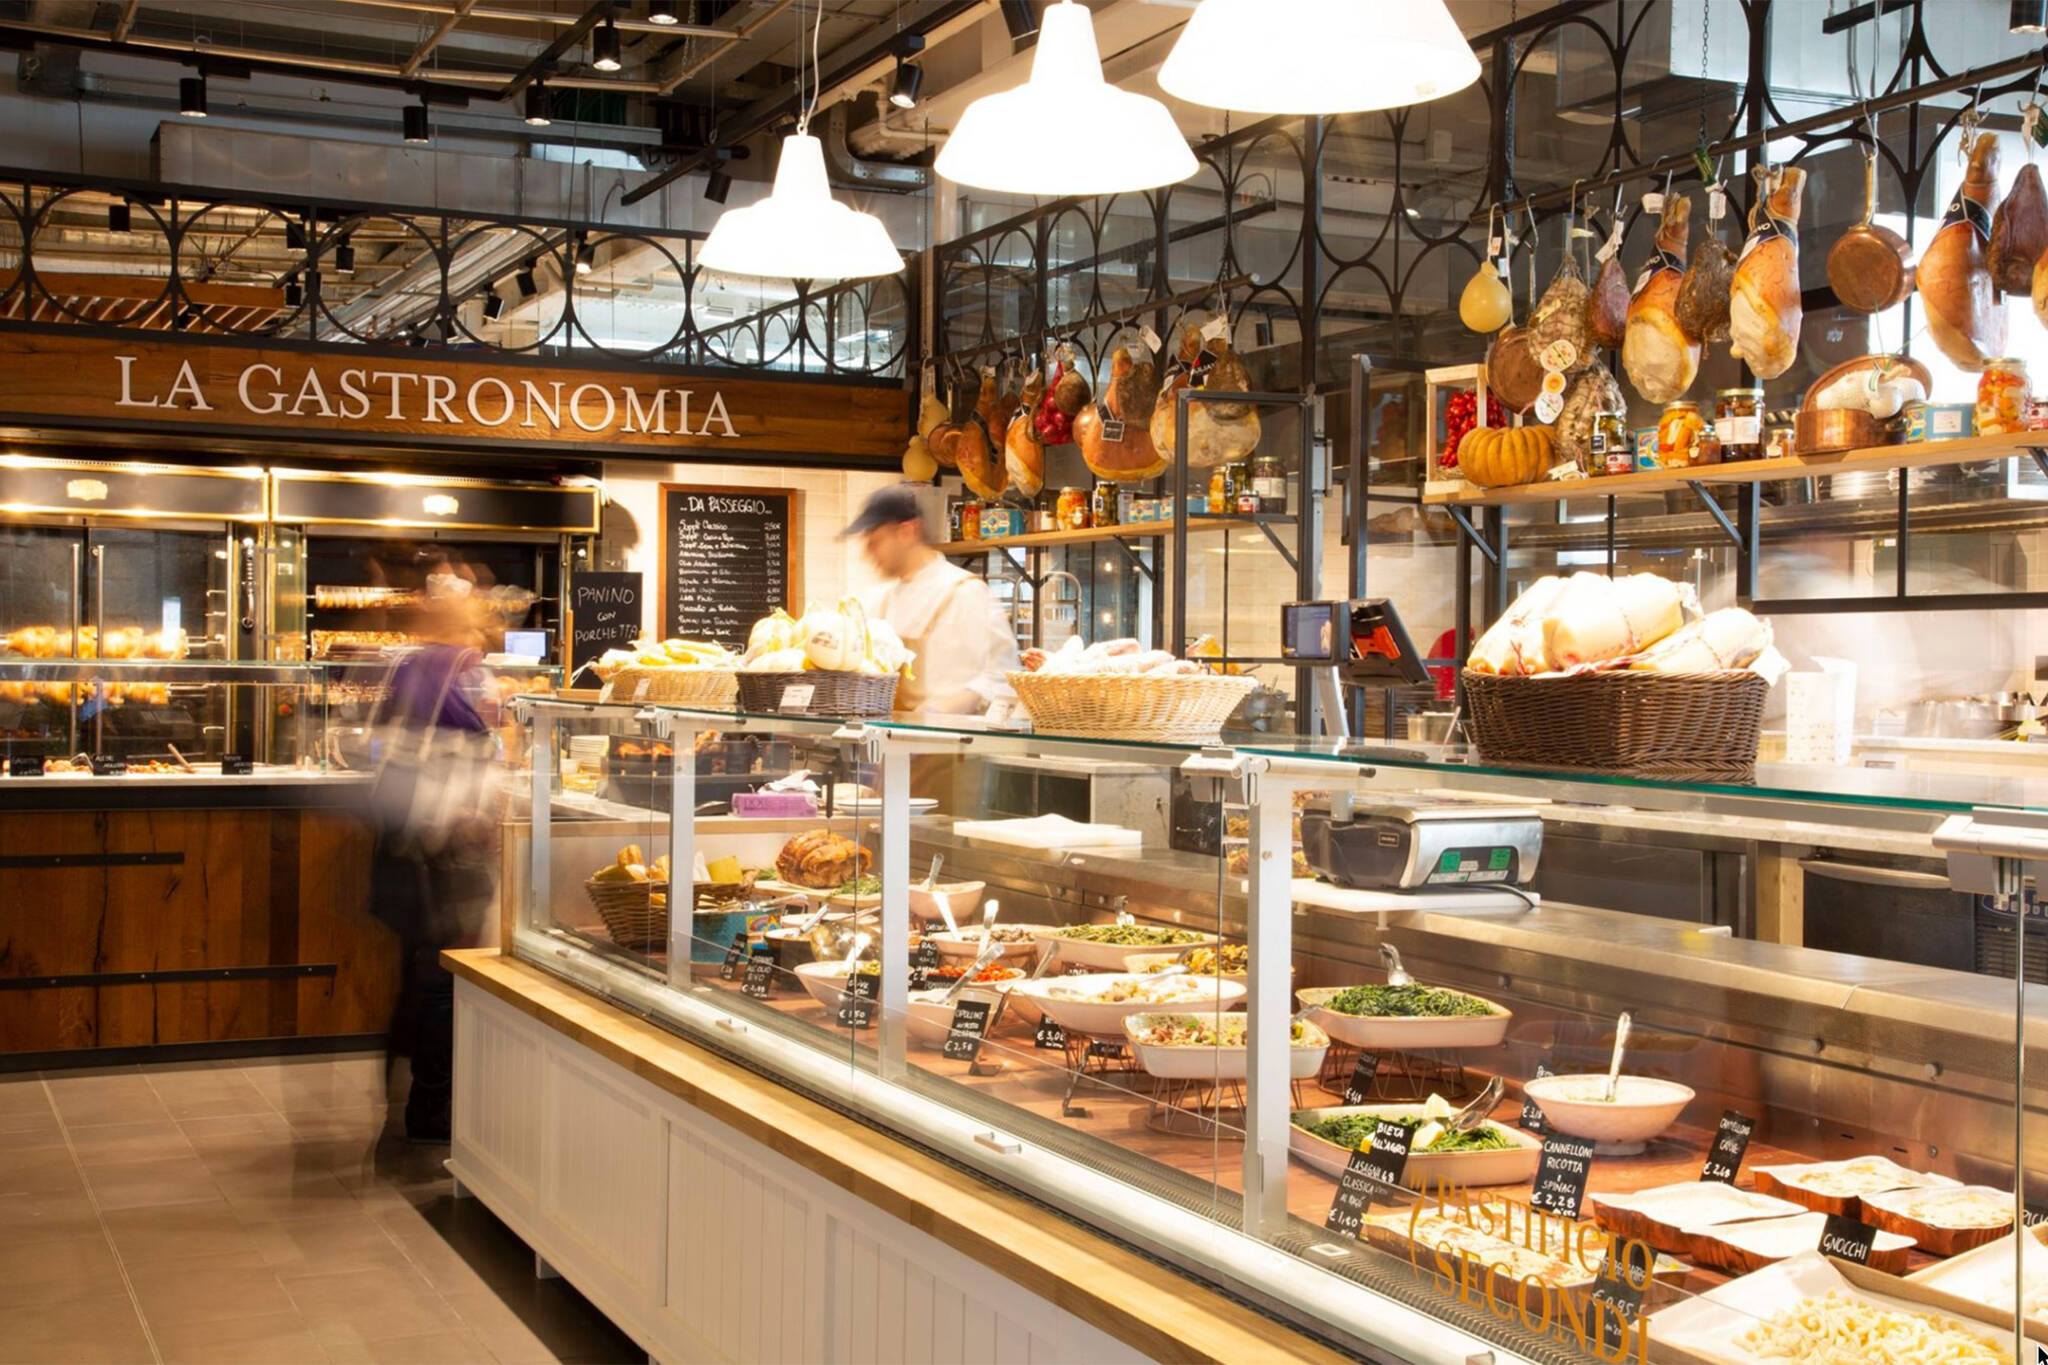 Toronto could be getting a second Eataly location